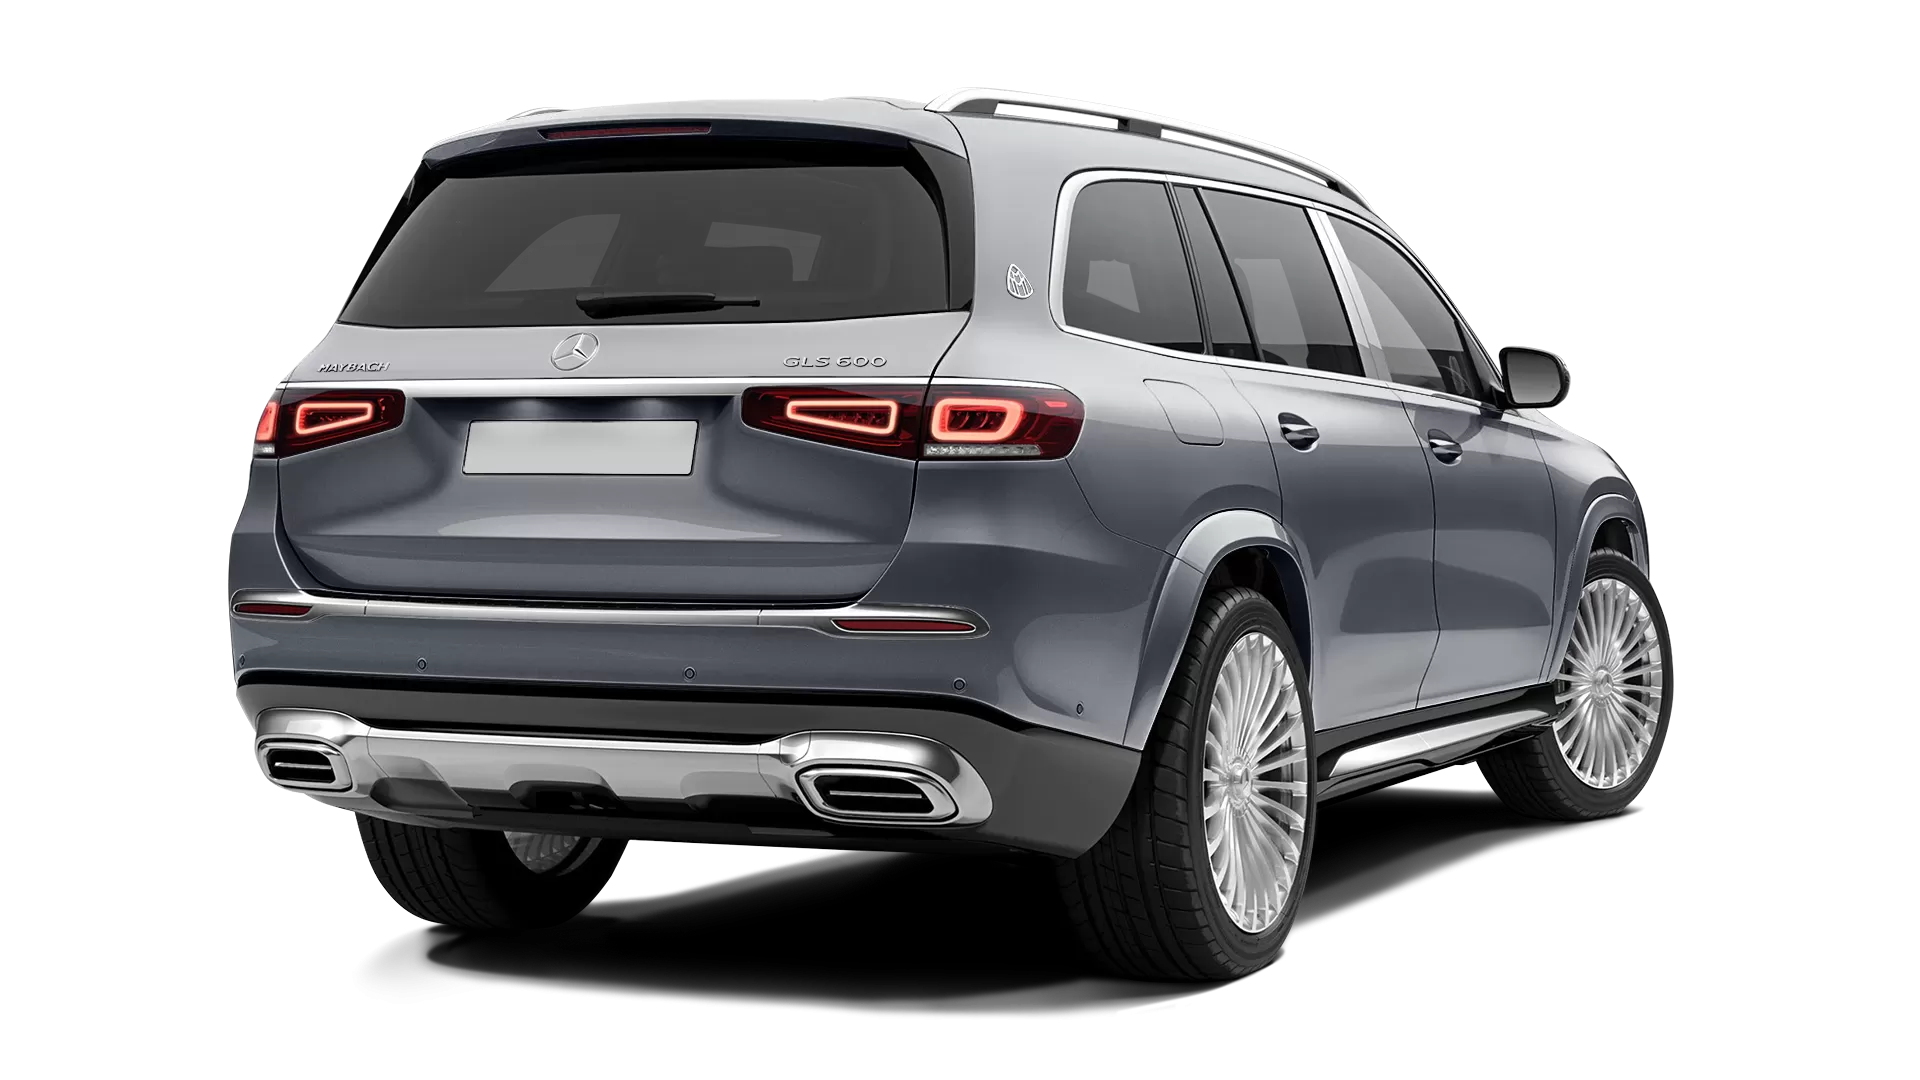 Mercedes Maybach GLS 600 stock rear view in Selenite Grey color